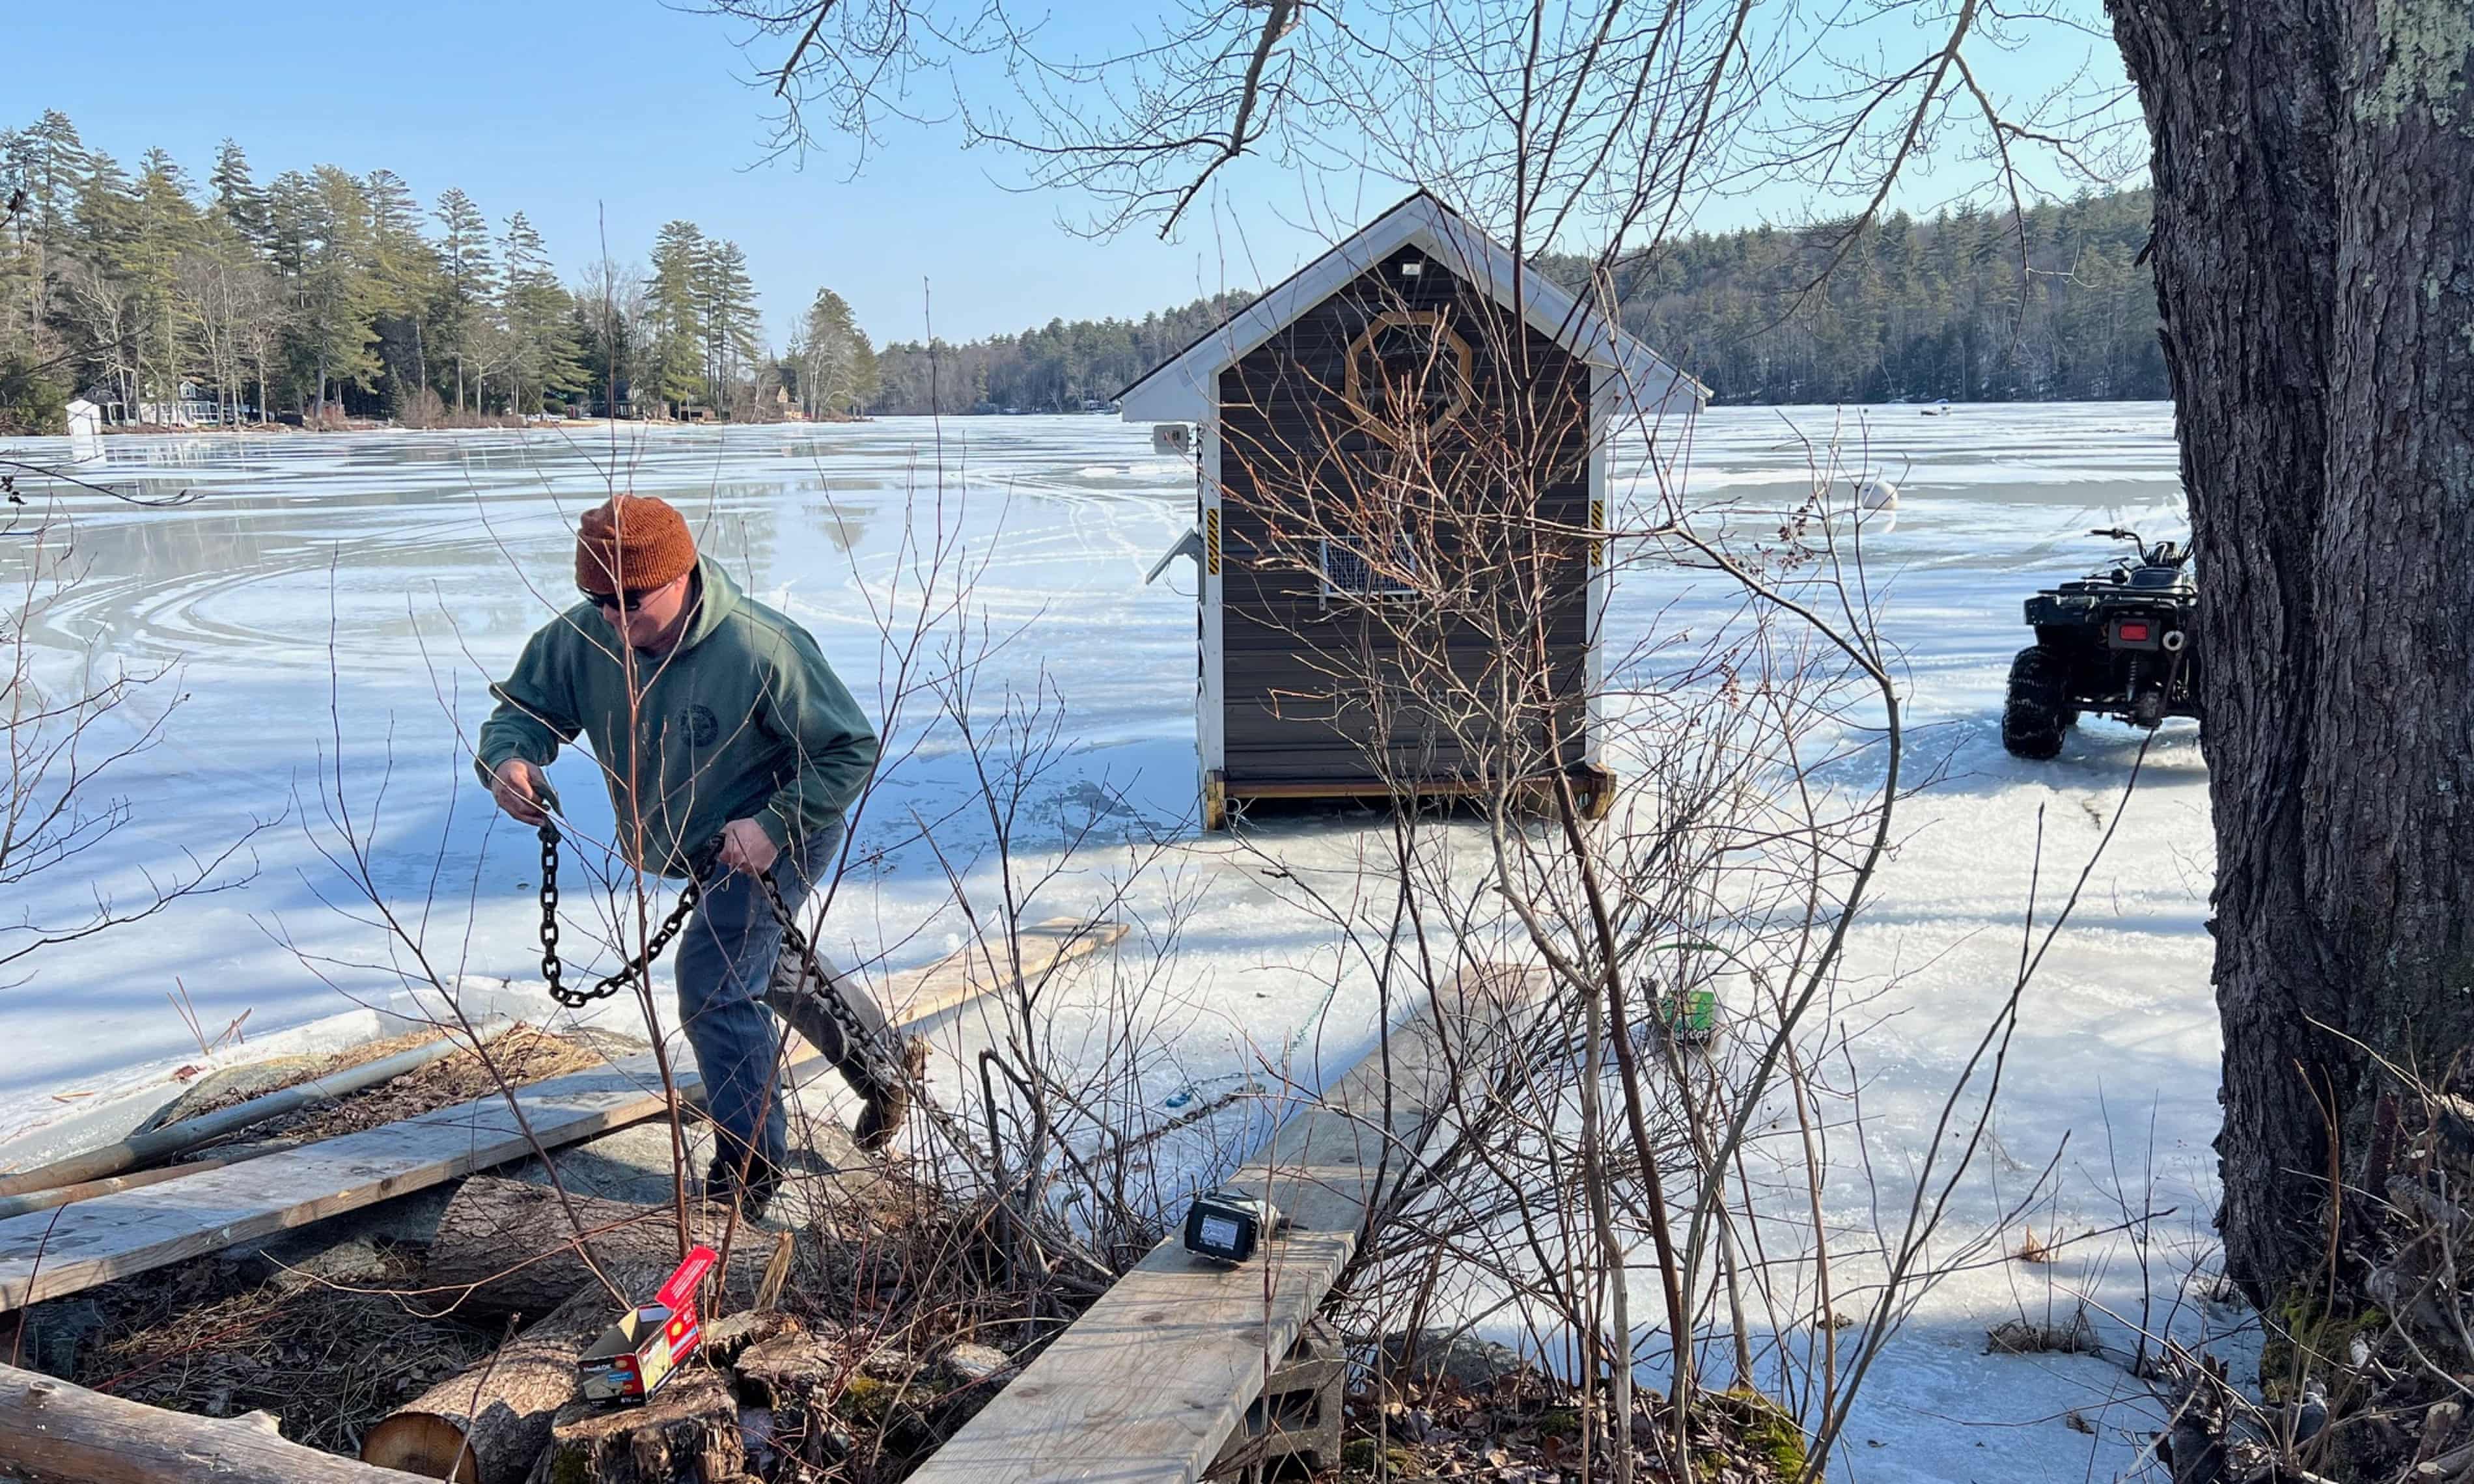 Higher temperatures force New England fishers off ice early: ‘Global warming is real’ (theguardian.com)